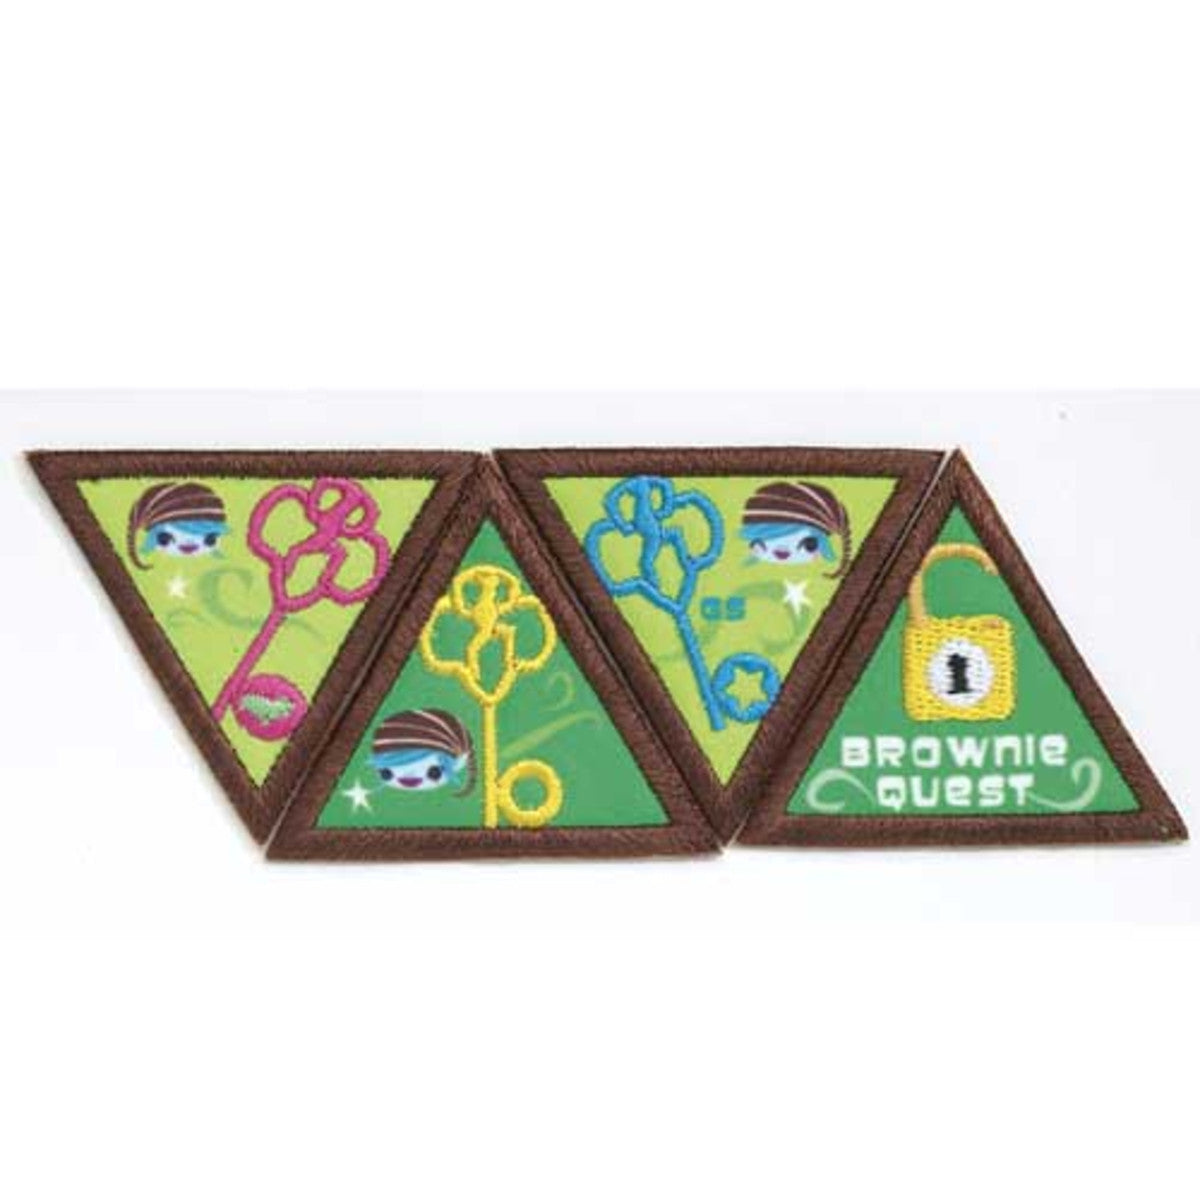 Girl Scouts Quest Brownie Journey Award Set - Basics Clothing Store